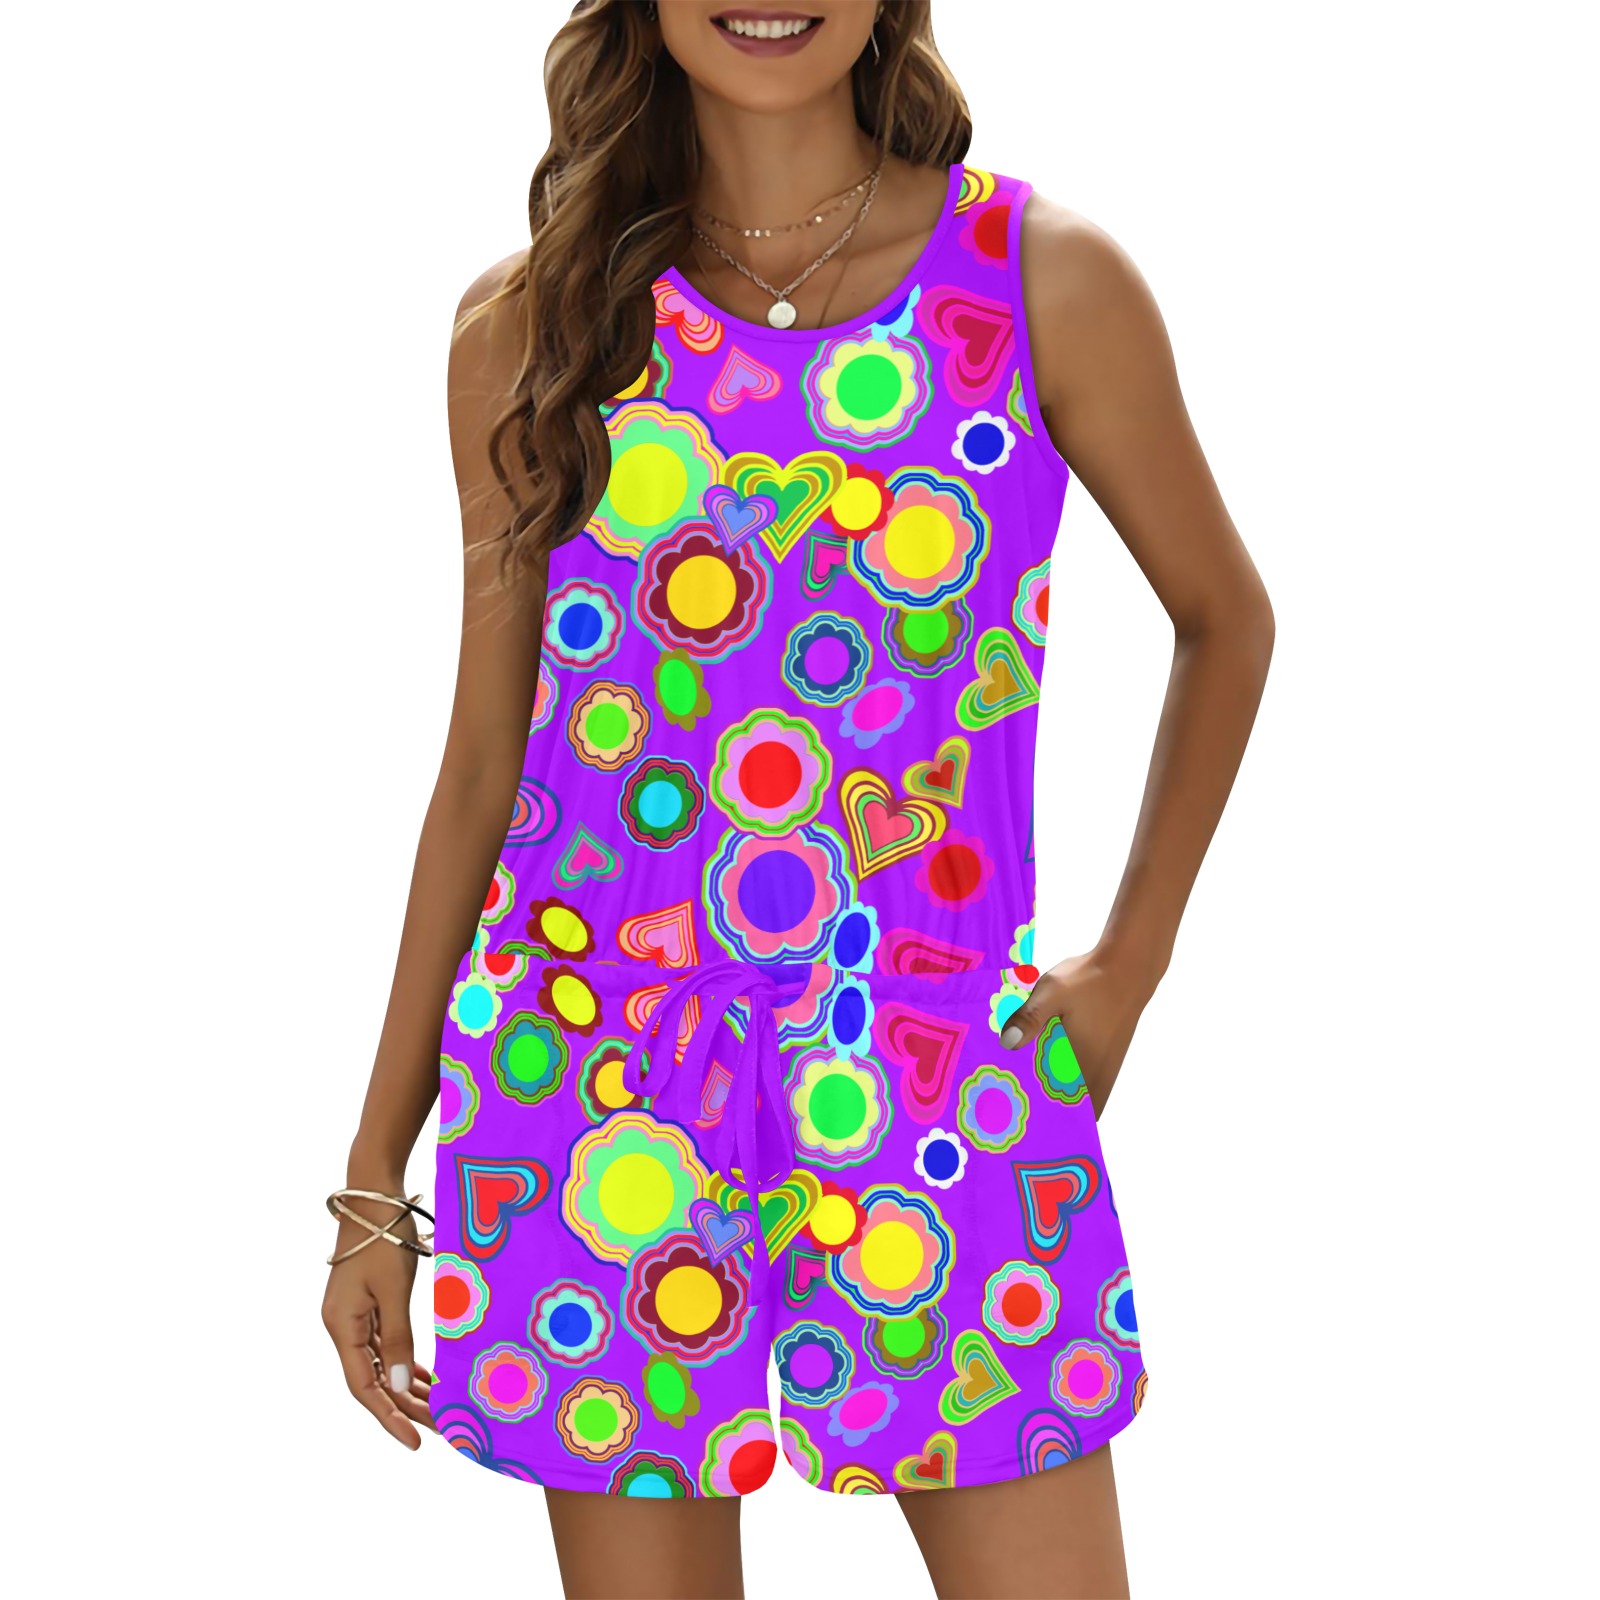 Groovy Hearts and Flowers Purple All Over Print Vest Short Jumpsuit